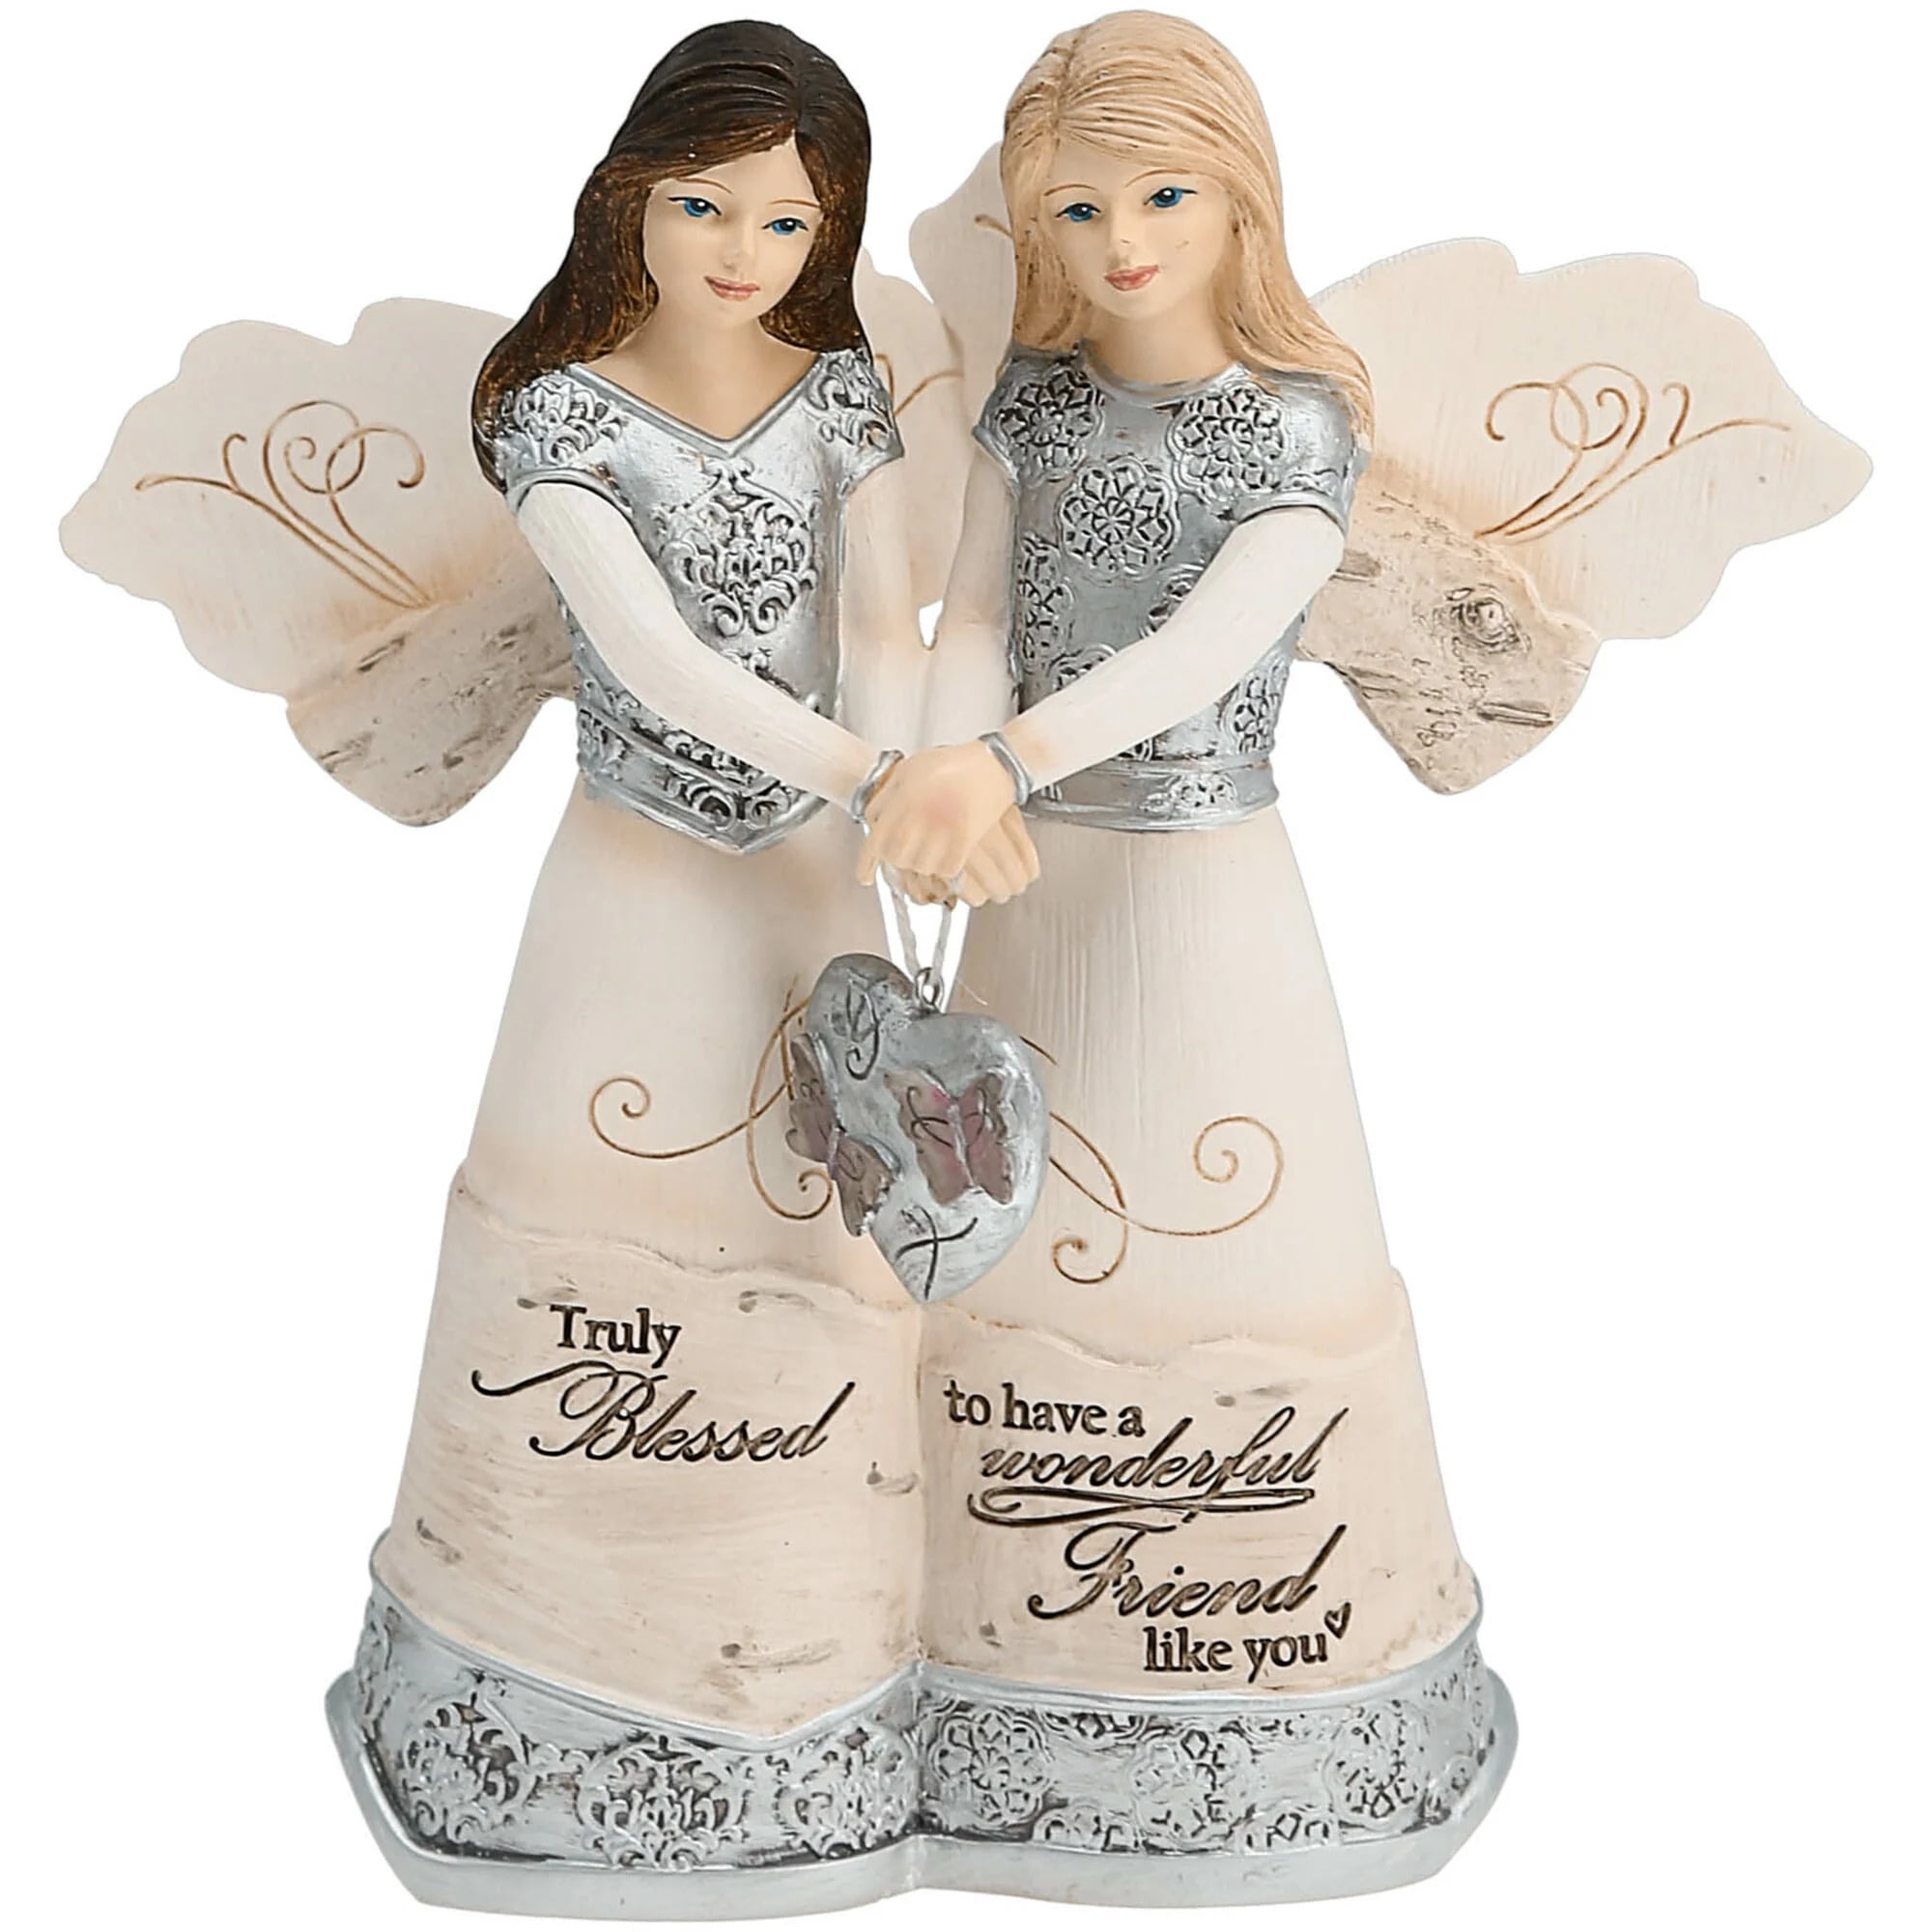 Pavilion Gift Company- Friendship Angels Holding Heart, 5 Inch